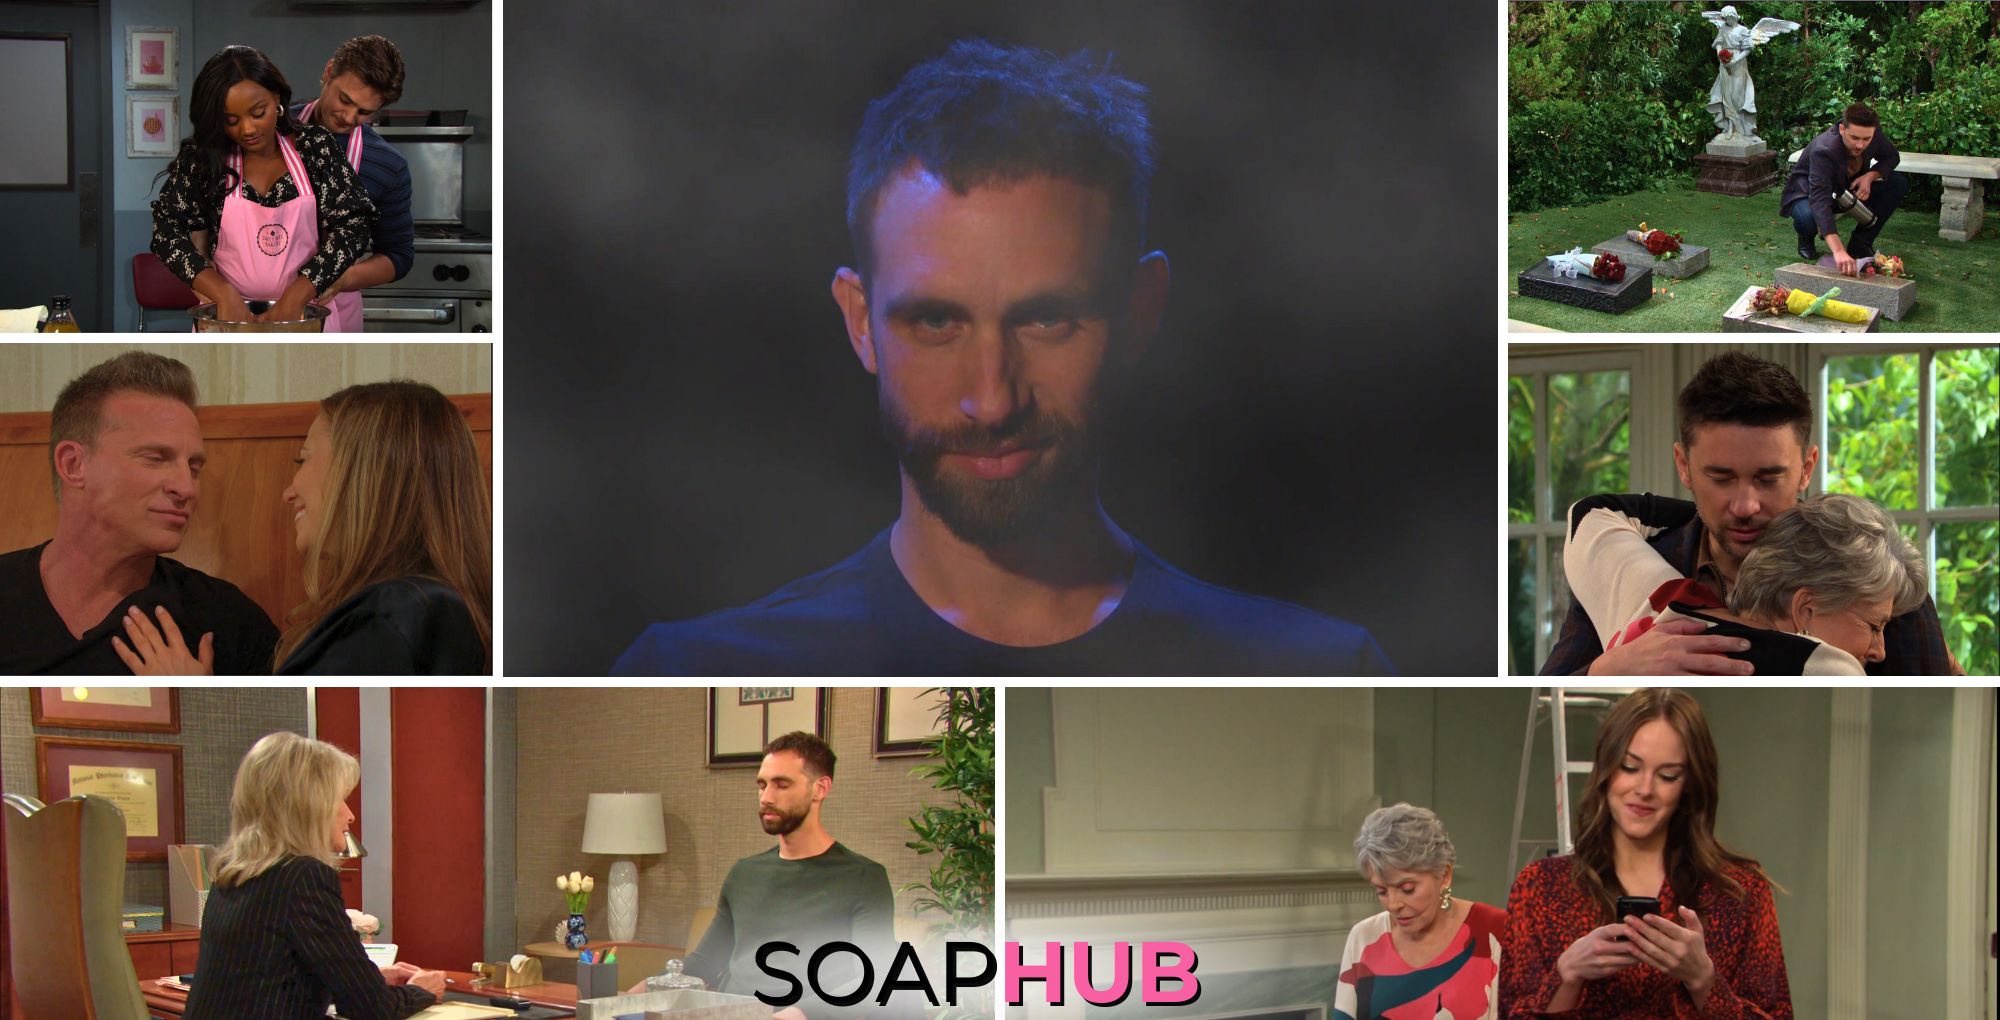 Days of our Lives recap photos for April 2 feature Chanel, Johnny, Julie Stephanie, Chad, Marlena, Everett, Ava, Harris. with soap hub logo on bottom of image